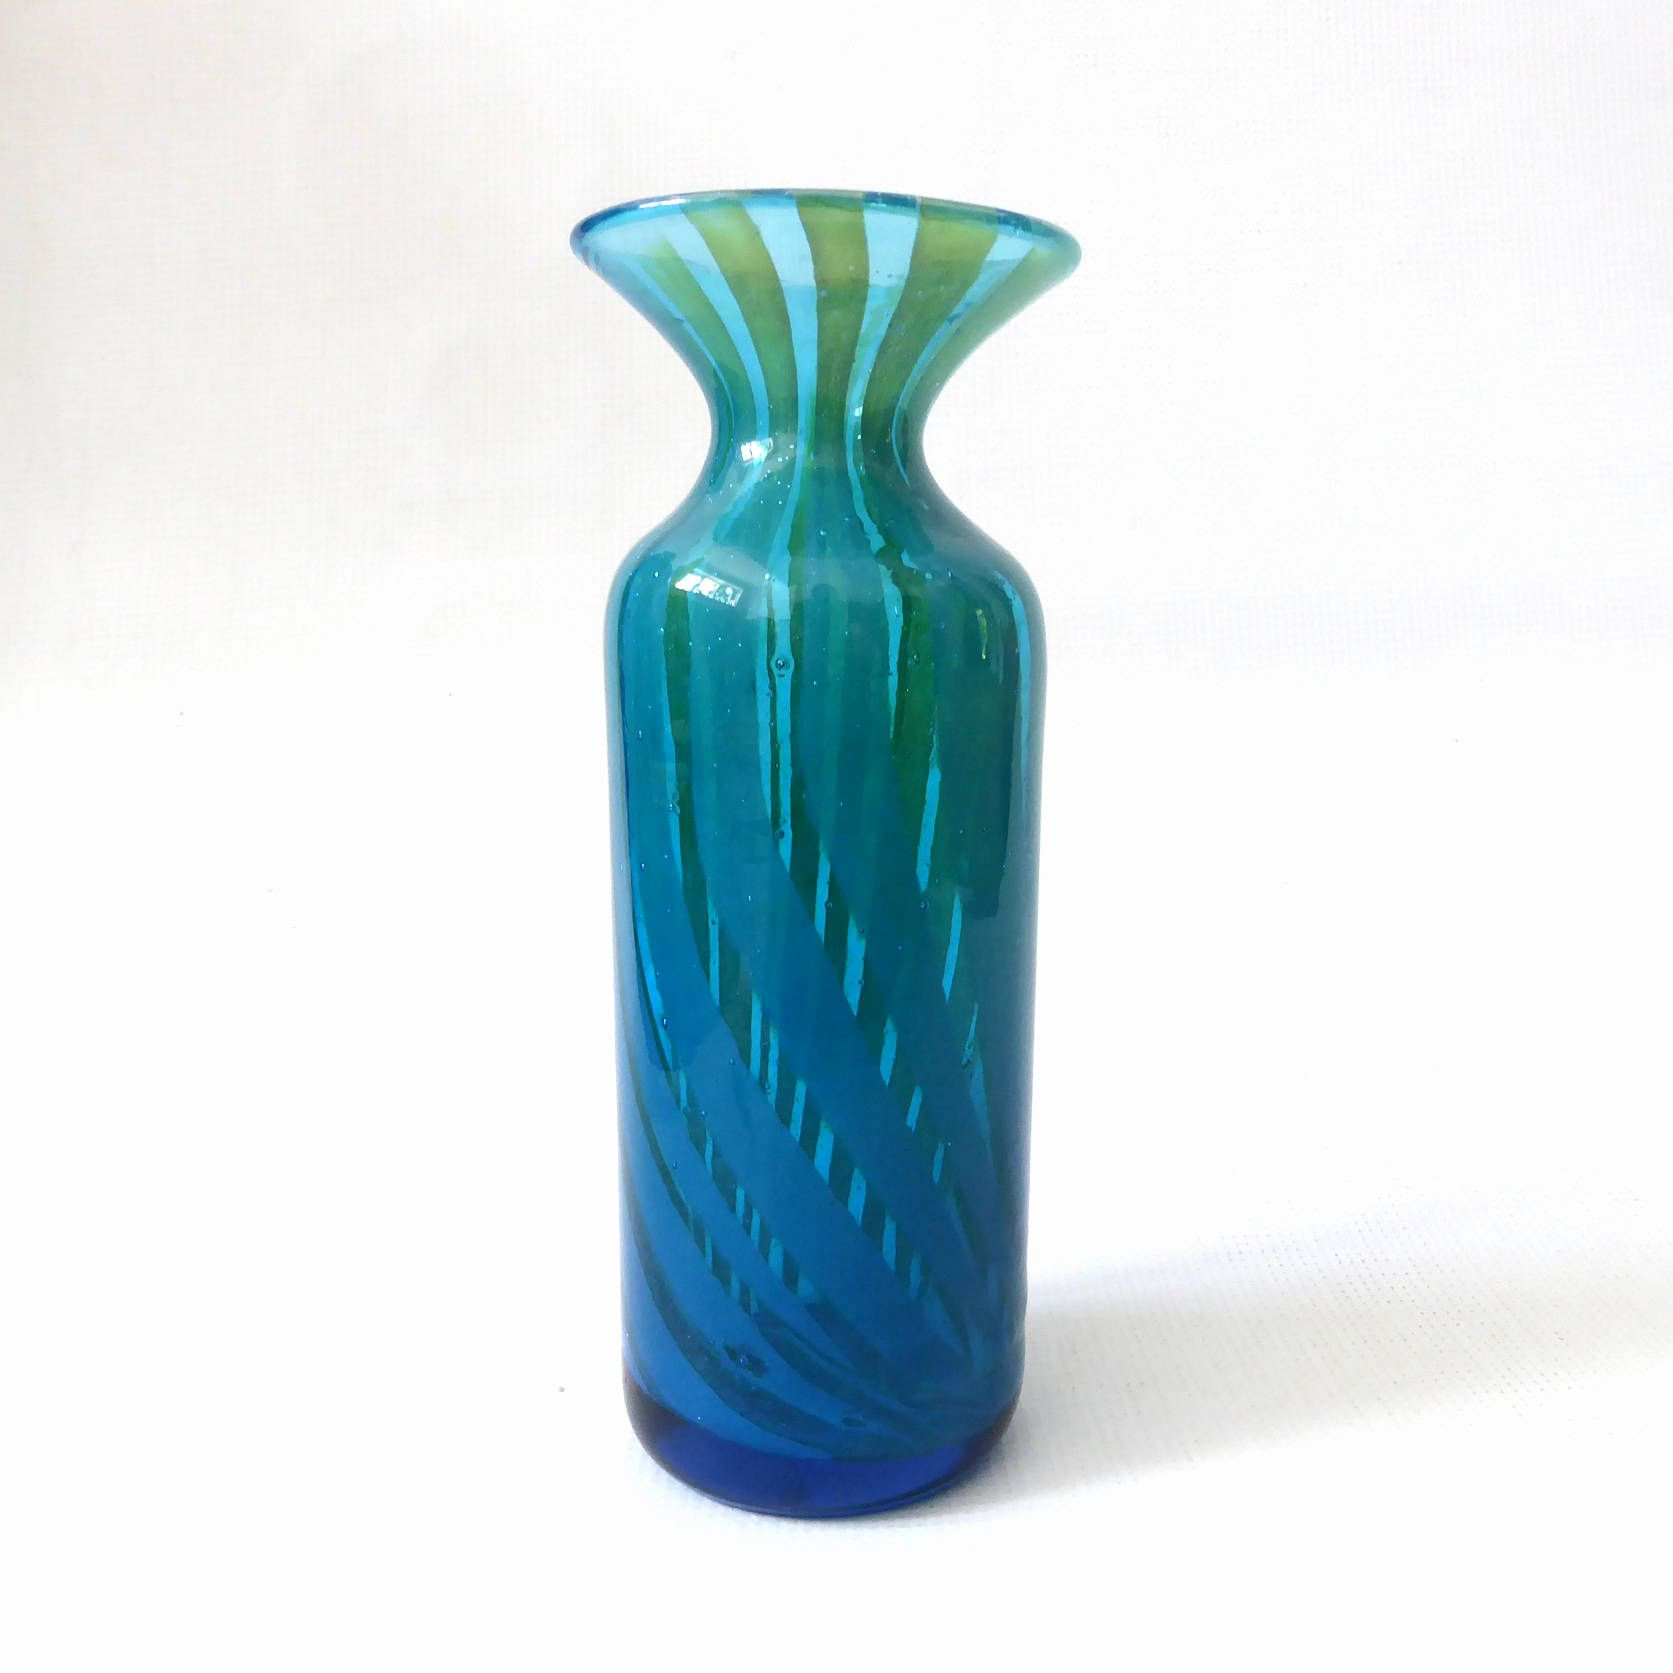 15 Lovable Hand Blown Glass Vases Bowls 2024 free download hand blown glass vases bowls of 35 antique green glass vases the weekly world inside antique glass vases identify vase and cellar image avorcor